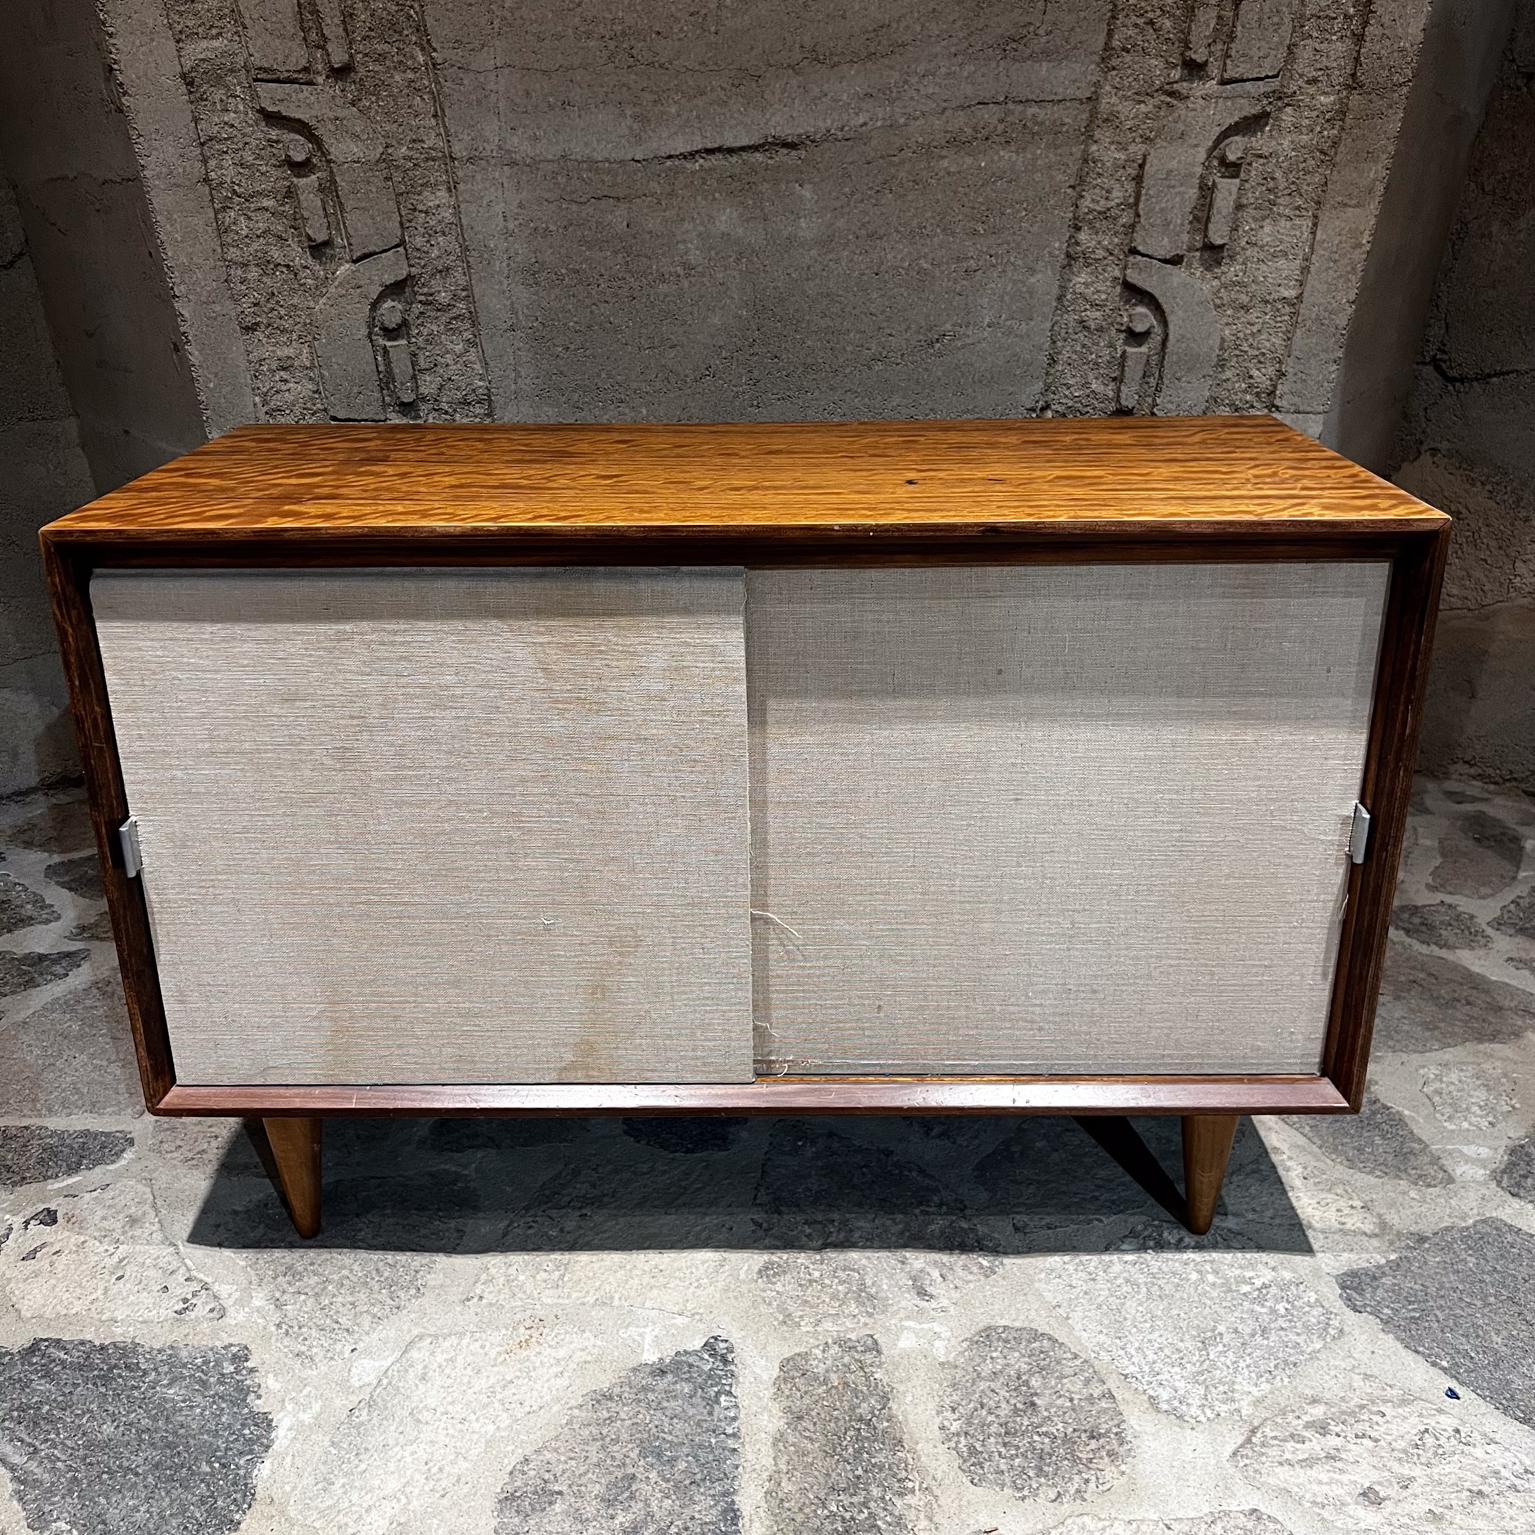 AMBIANIC presents
1950s Modern Edward Wormley for Dunbar Sliding Door Cabinet
Interior shelf
Unsigned attribution Edward Wormley
42 w x 19 d x 27.75 h
Preowned original vintage condition. Some stains present panel doors.
Refer to photos.